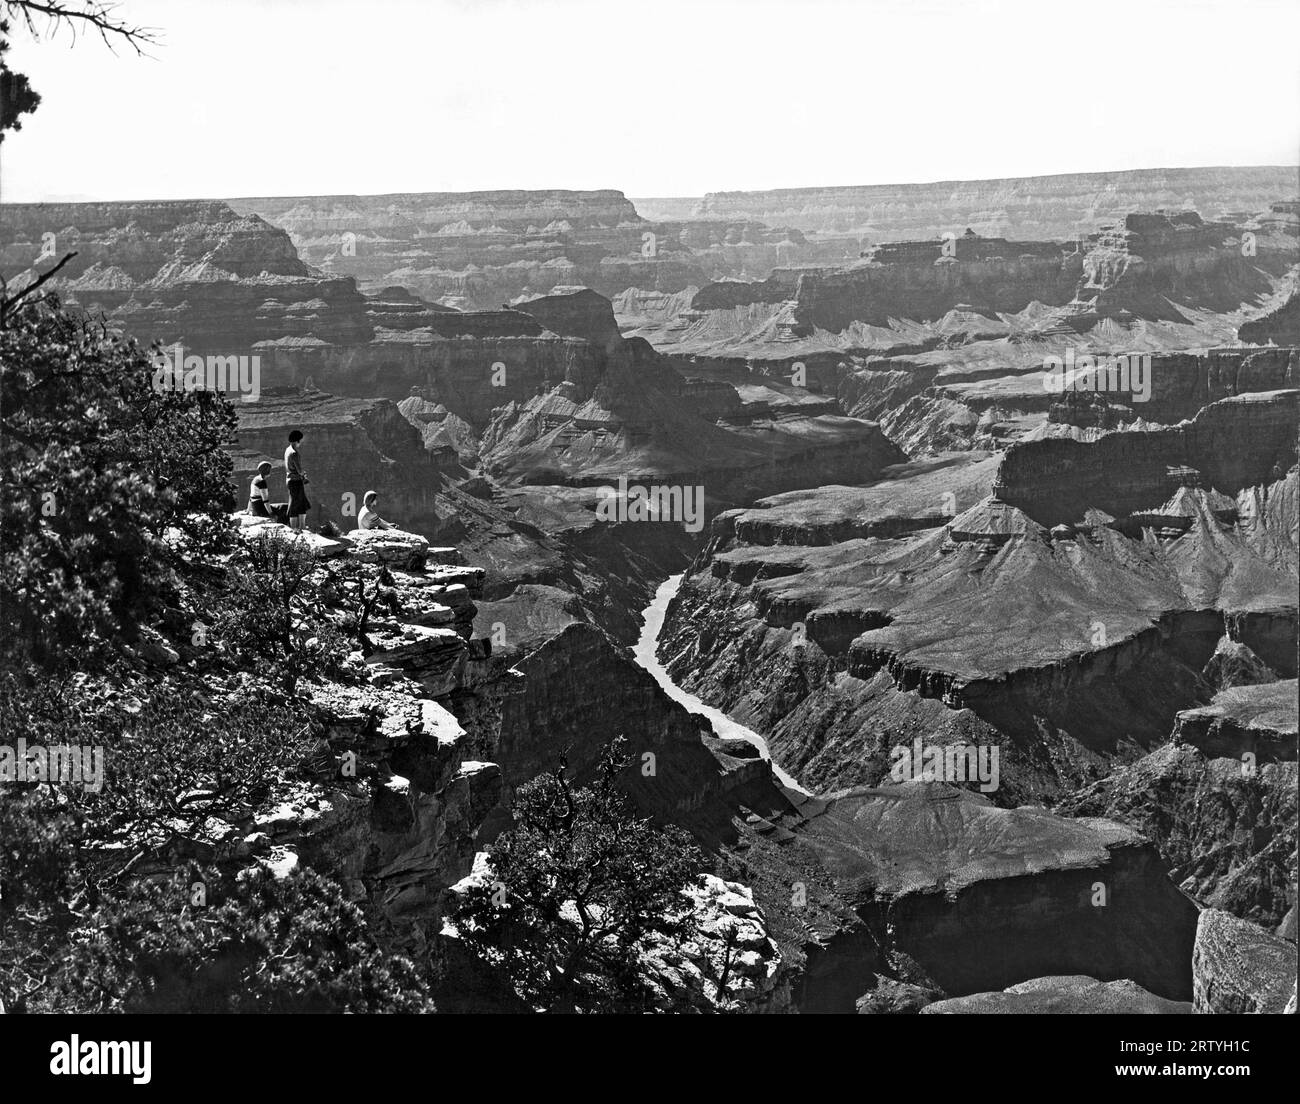 Arizona    c. 1949 The Grand Canyon showing the inner gorge of the Colorado River as seen from the South Rim between the Mojave and Pima Points. Stock Photo